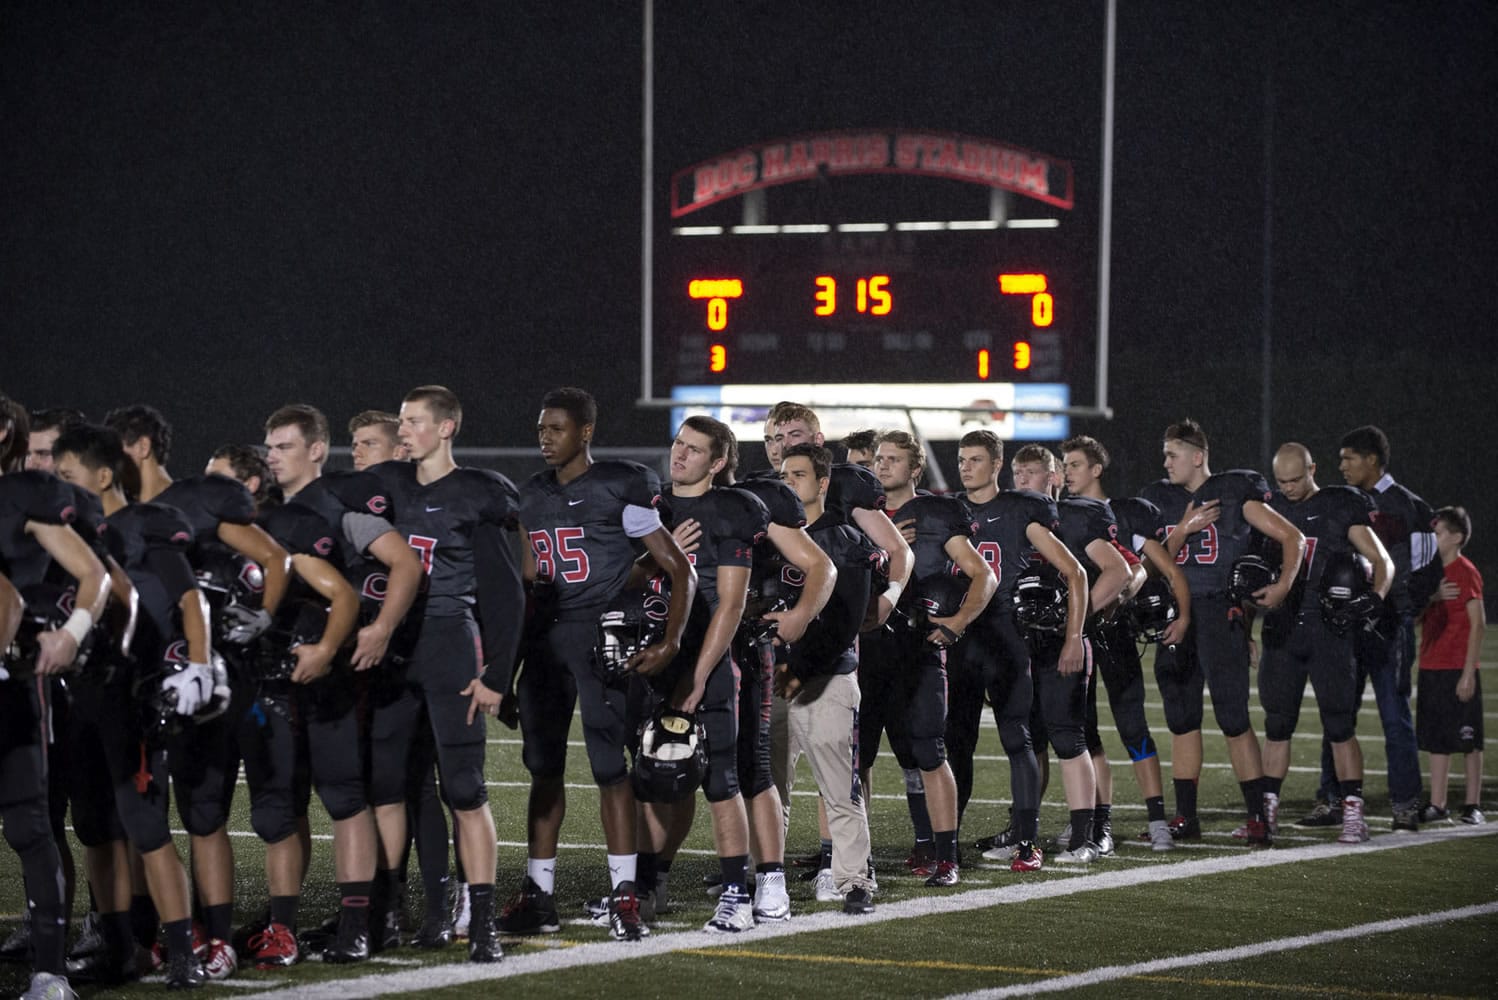 Members of the Camas High School football team remove their helmets as the National Anthem is played Friday night, Oct. 9, 2015 at Doc Harris Stadium.